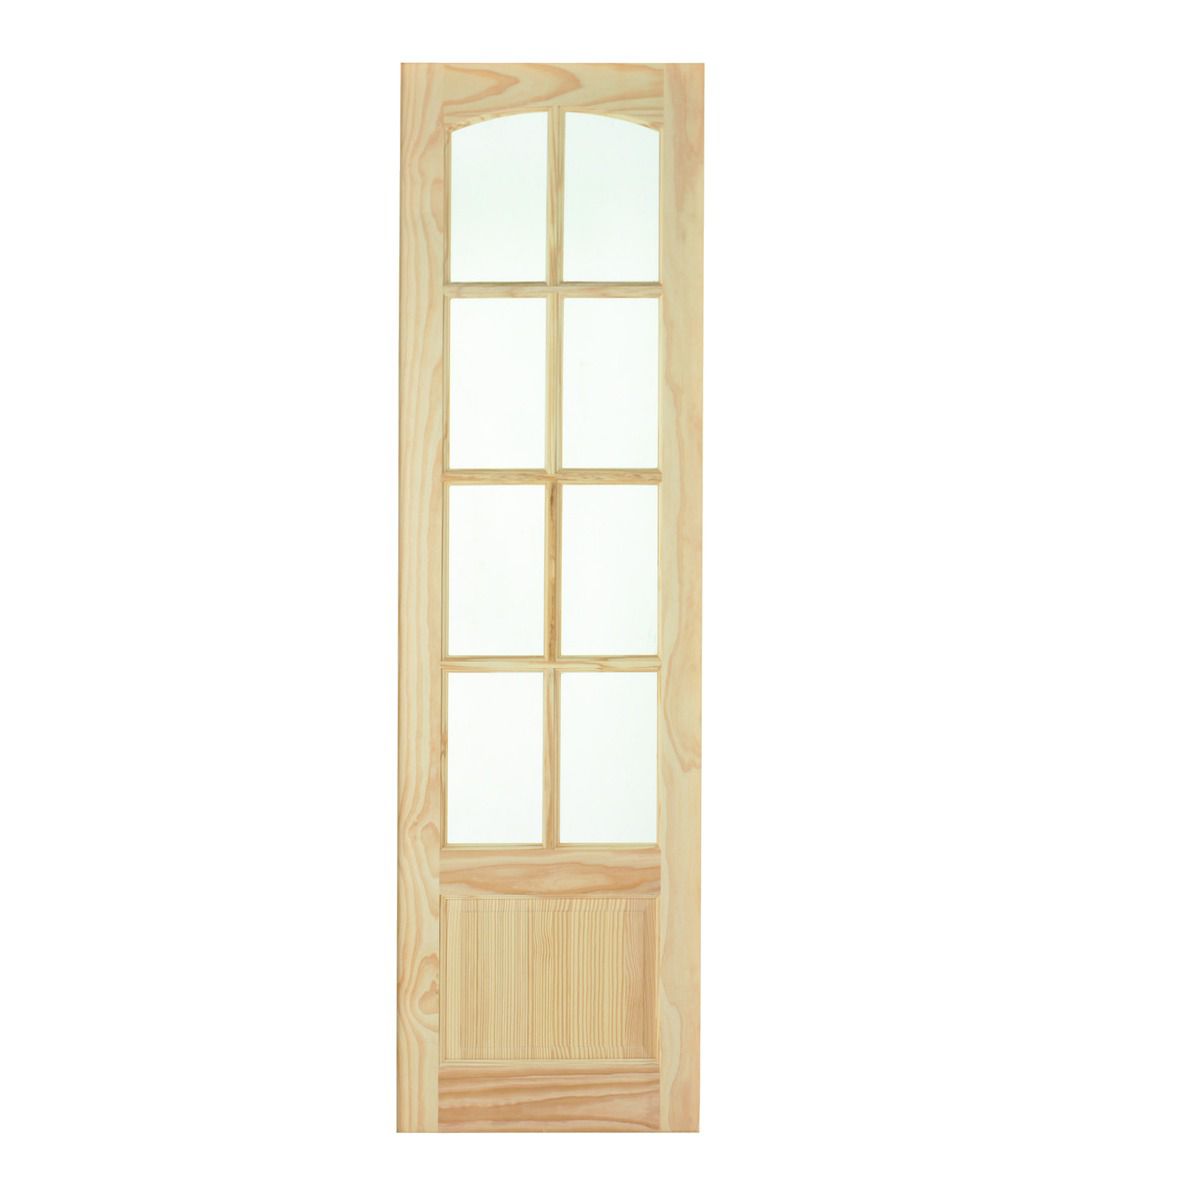 Image of Wickes Newland Glazed Clear Pine 8 Lite Internal French Door Panel - 1981 x 591mm